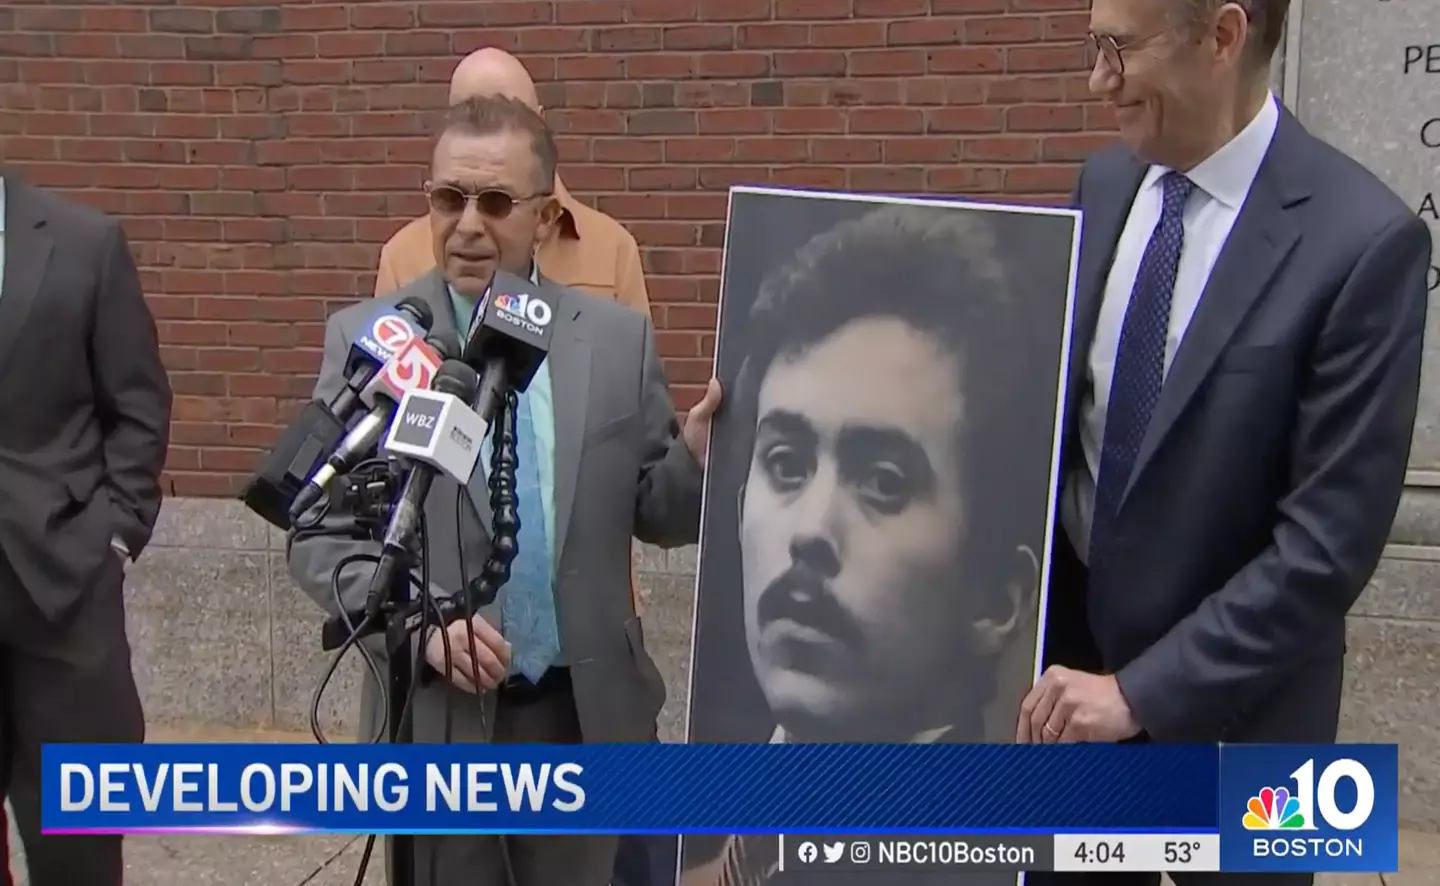 Rosario posed with a picture of himself as a 24-year-old in court.